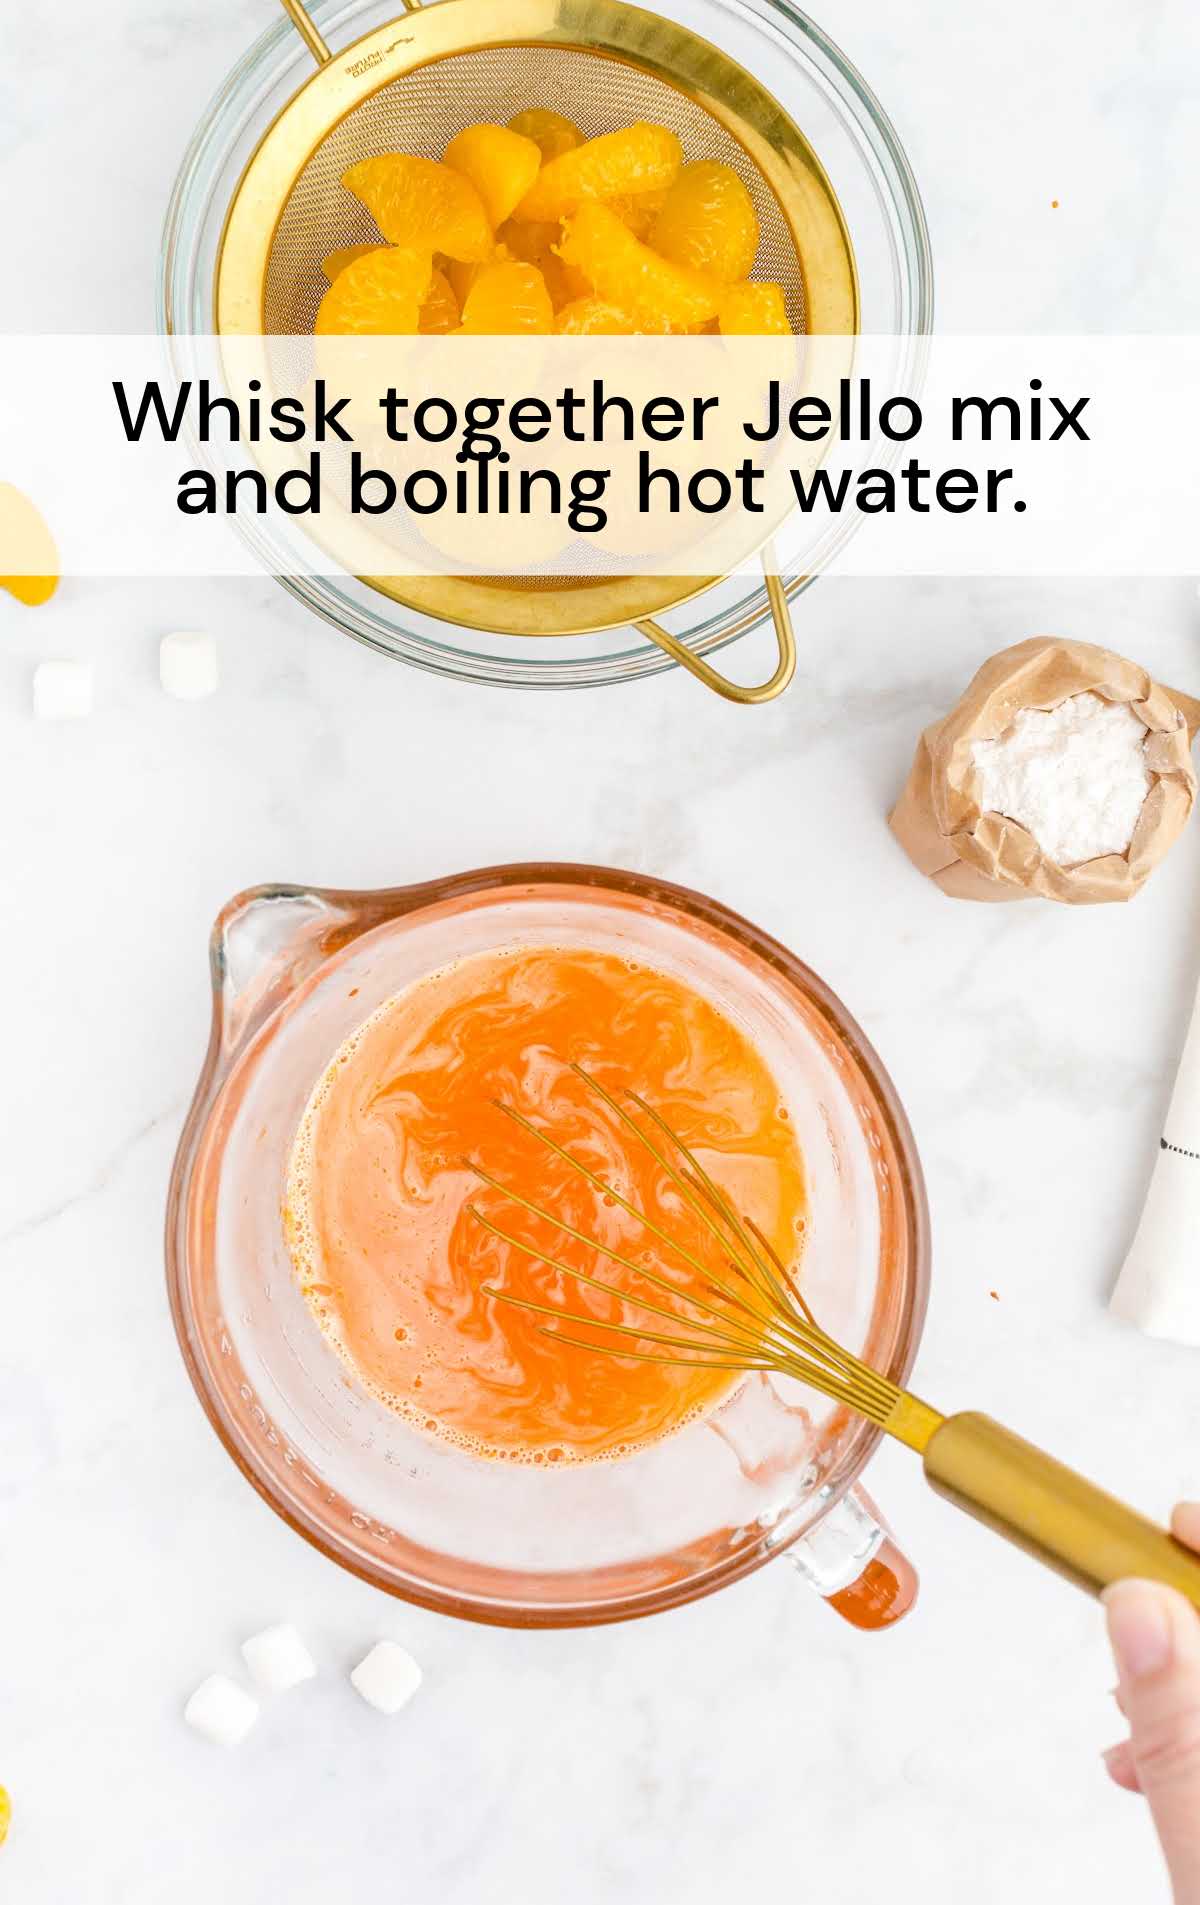 jello mix and water whisked together in a cup